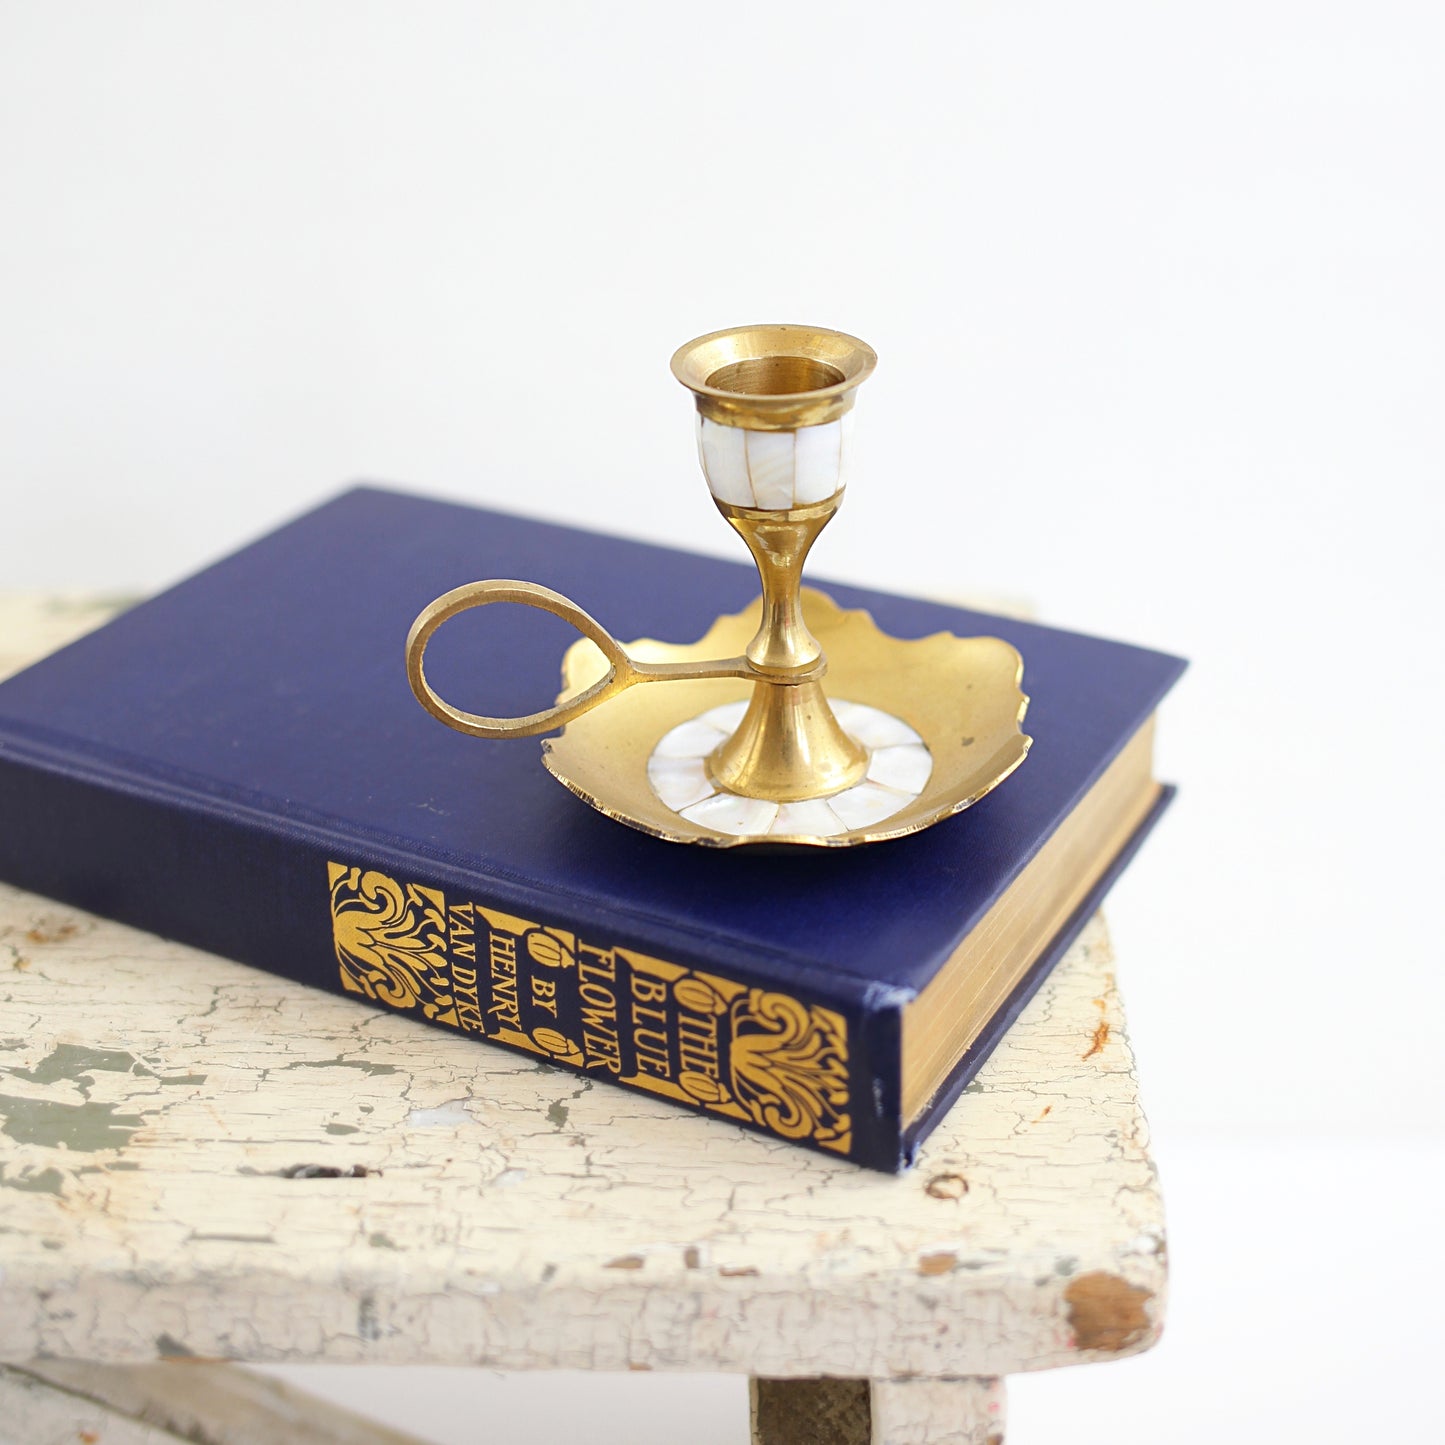 SOLD - Vintage Brass and Mother of Pearl Candlestick